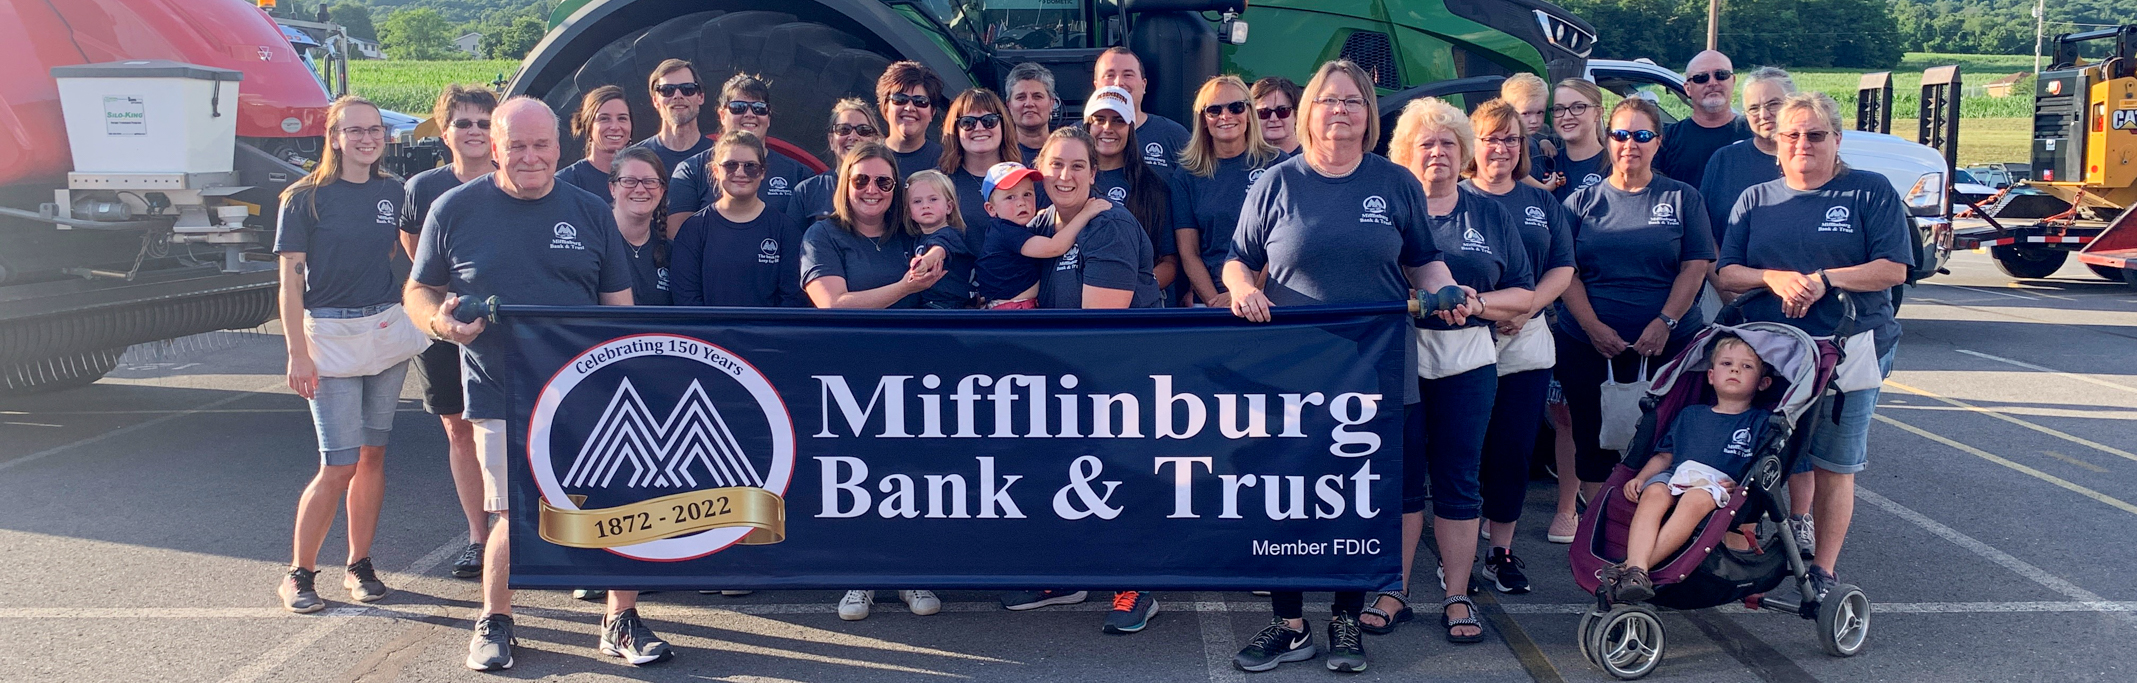 Photo of Mifflinburg Bank and Trust Team at the New Berlin Parade in 2022